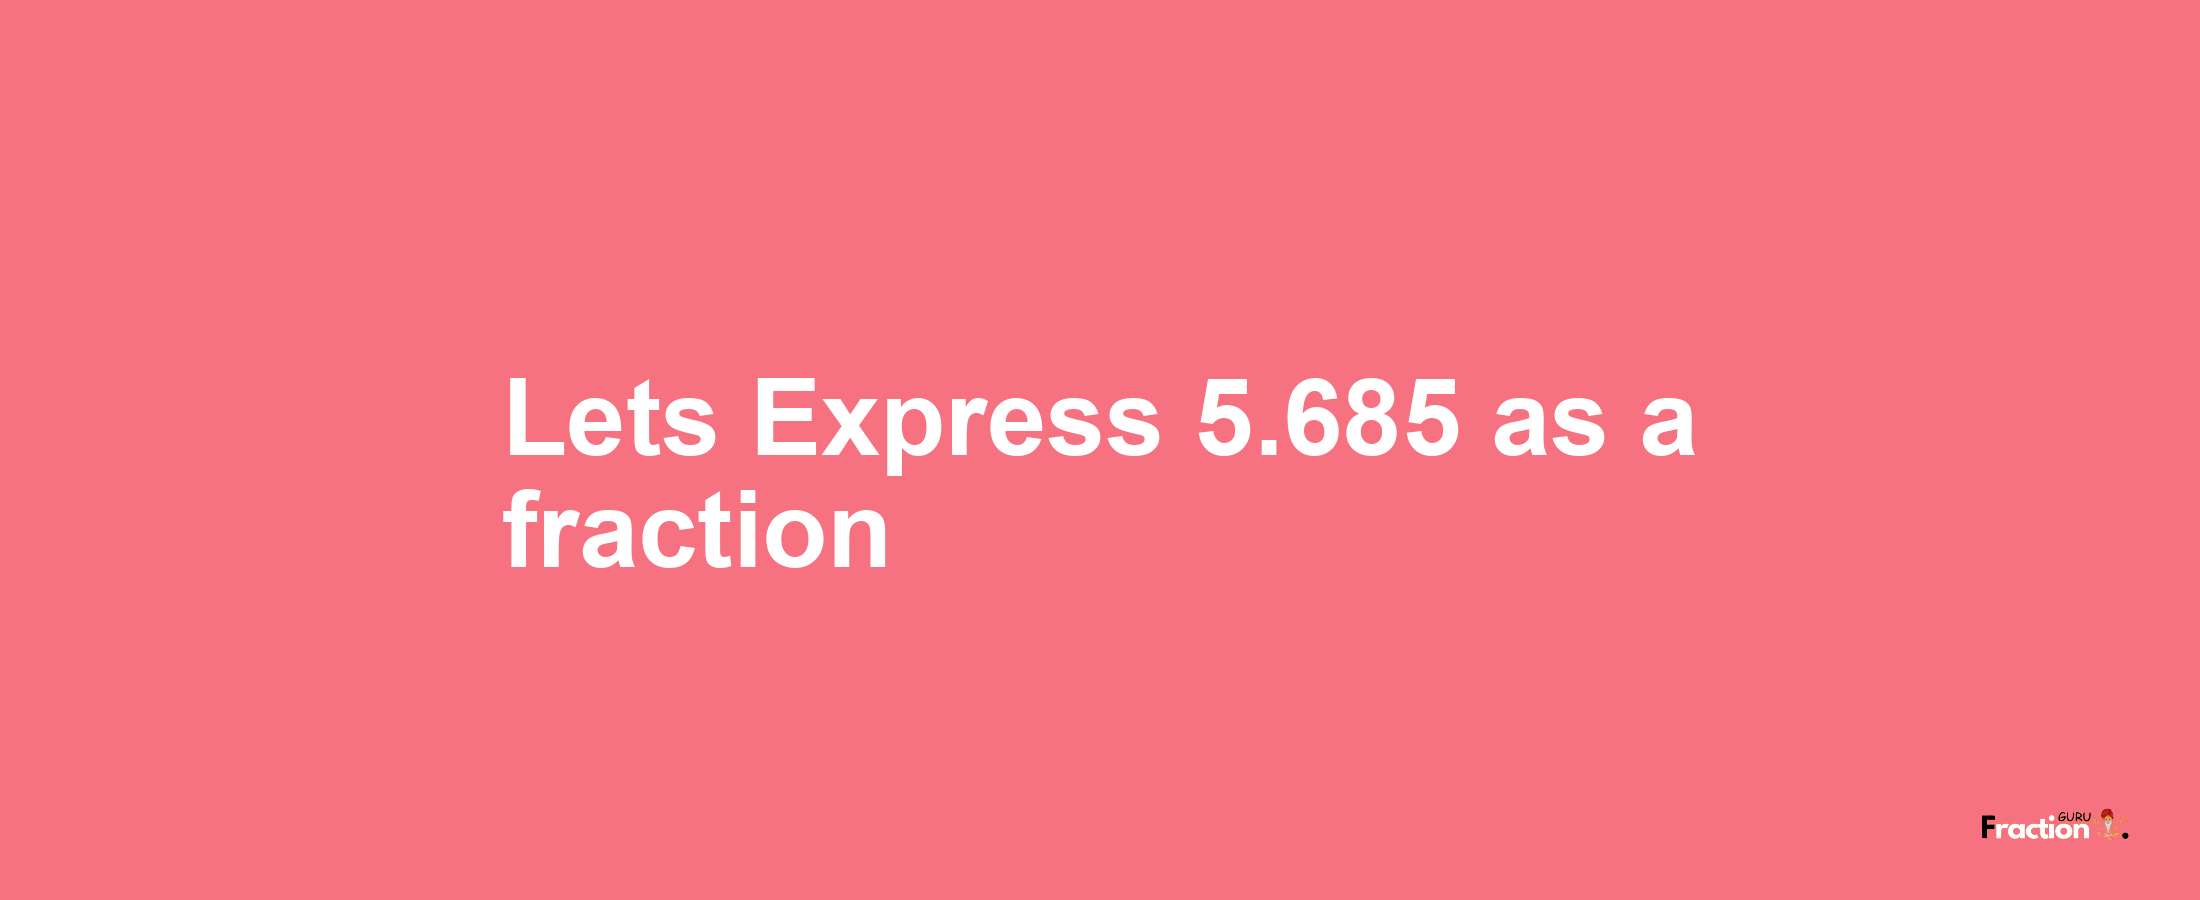 Lets Express 5.685 as afraction